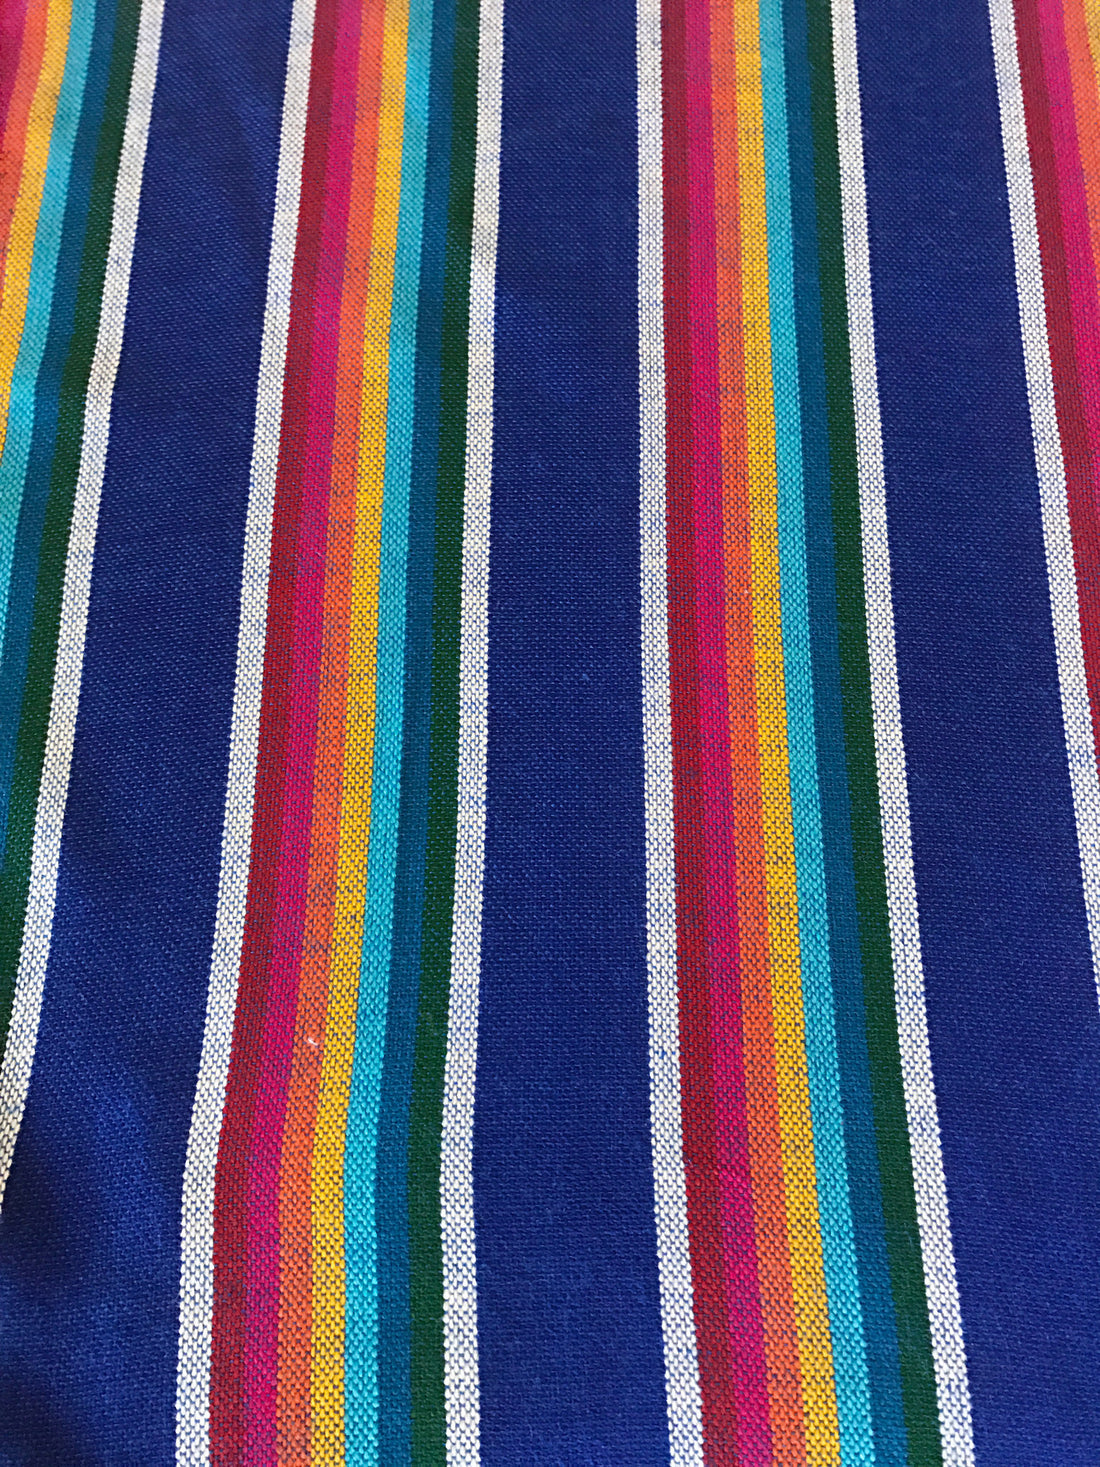 Mexican Table Runner Navy Stripes – MesaChic